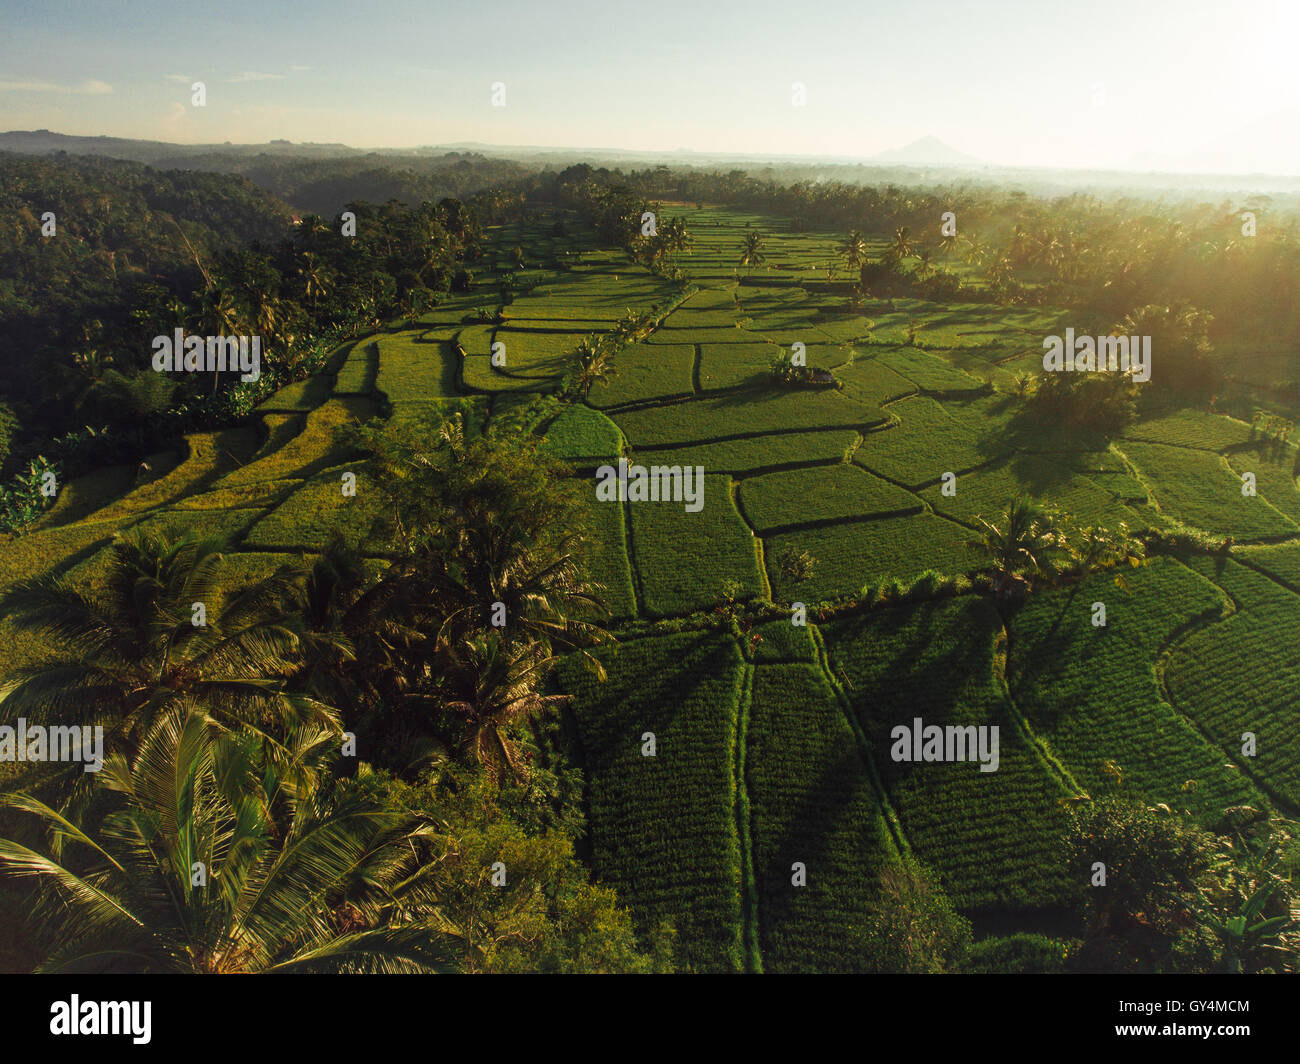 Aerial view of rice fields in a village on a sunny day Stock Photo